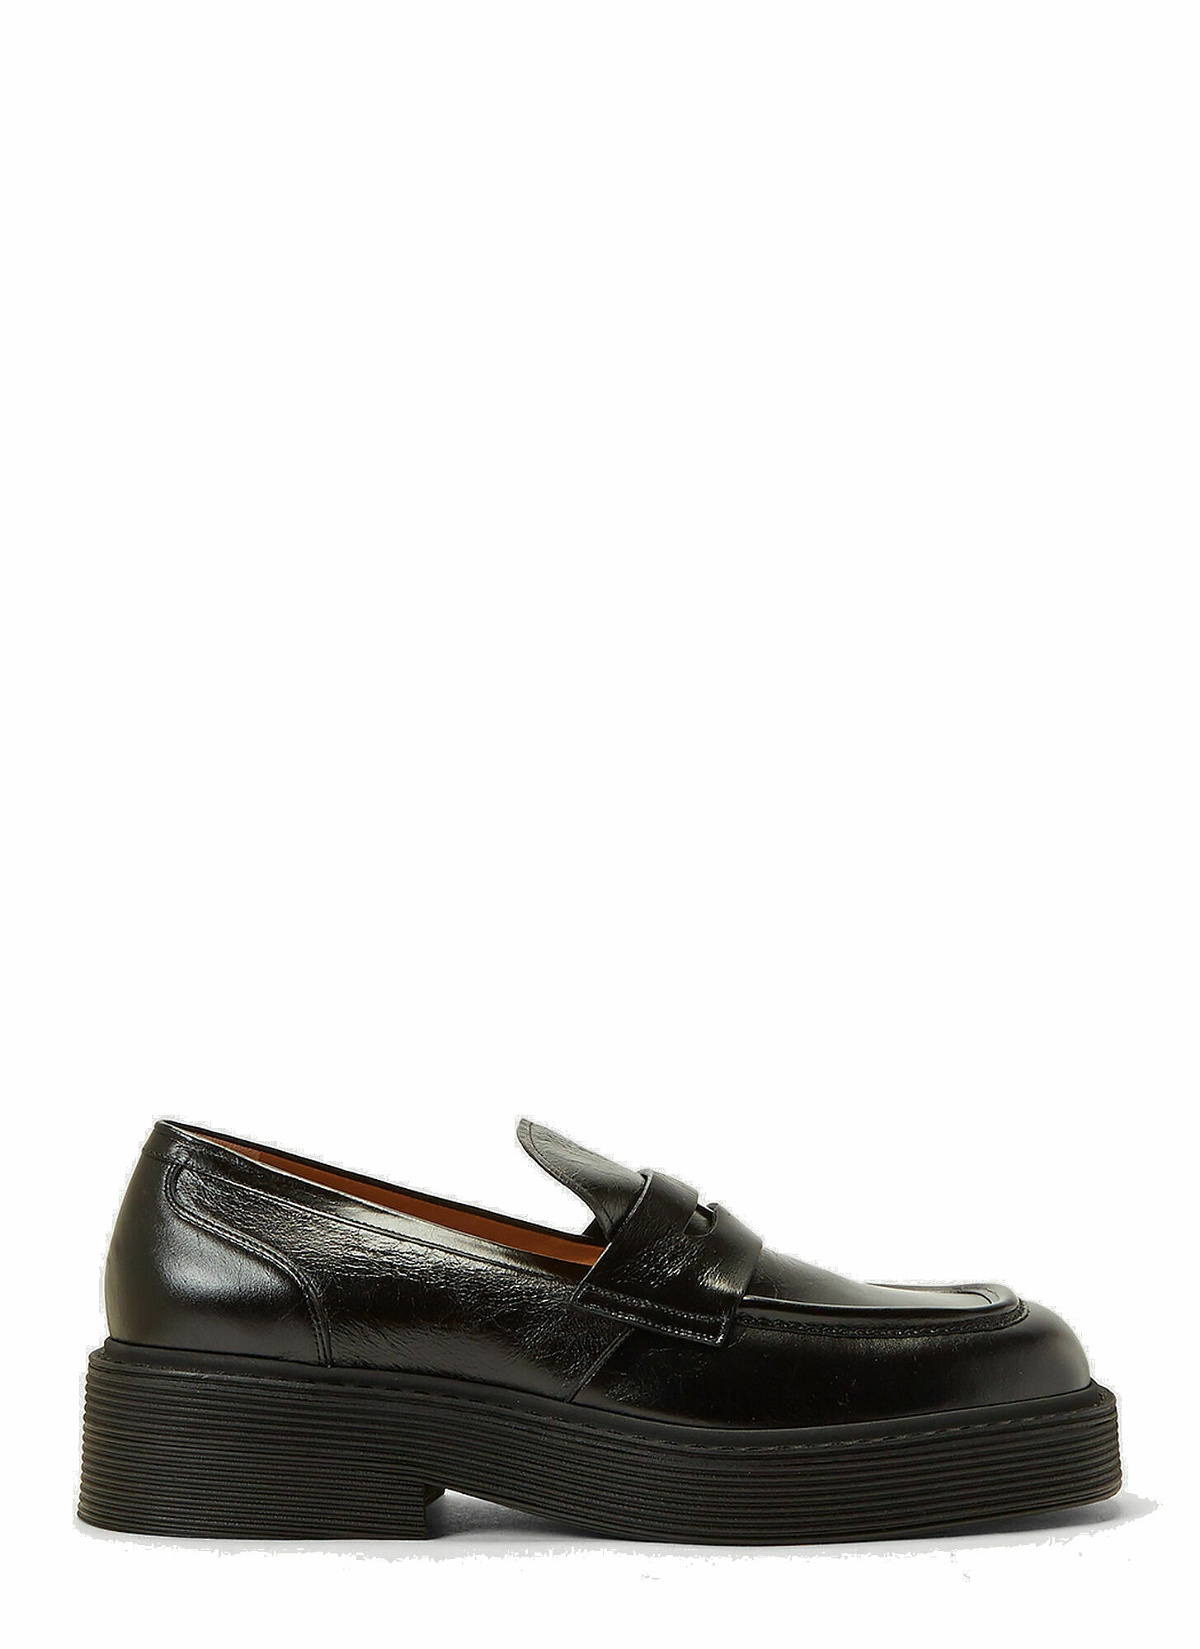 Photo: Penny Loafers in Black